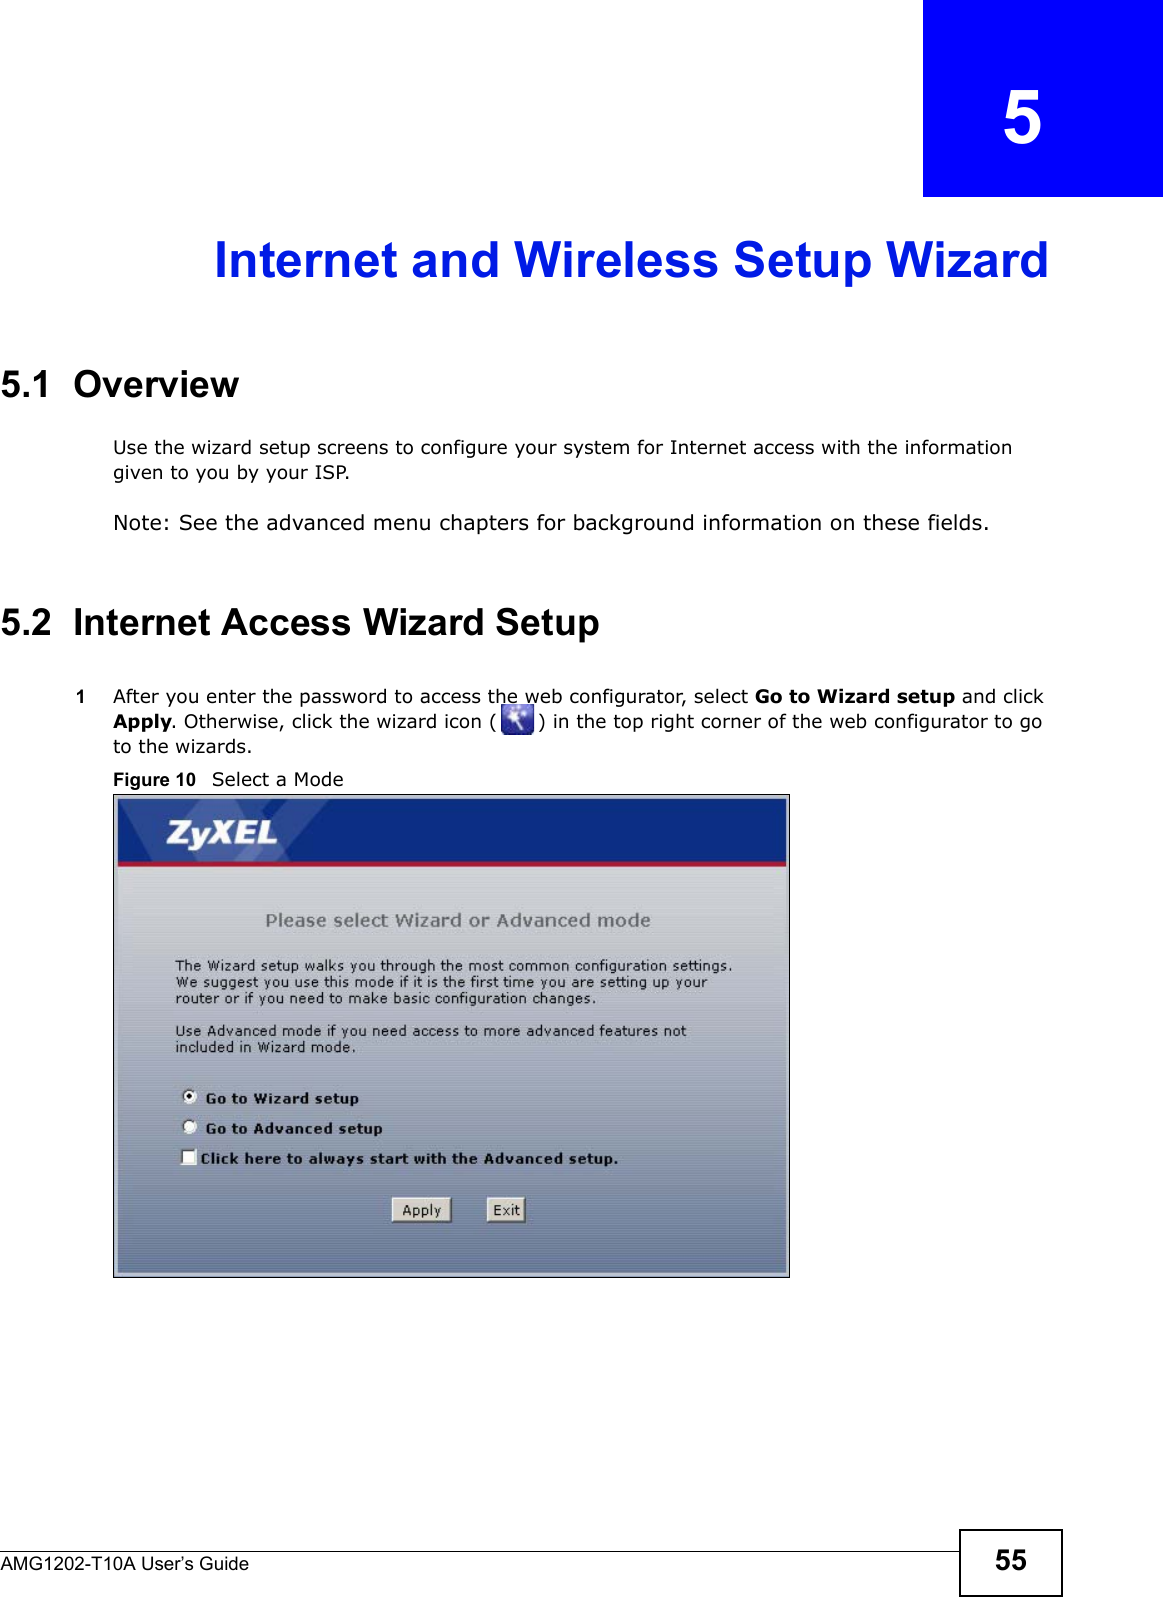 AMG1202-T10A User’s Guide 55CHAPTER   5Internet and Wireless Setup Wizard5.1  OverviewUse the wizard setup screens to configure your system for Internet access with the information given to you by your ISP. Note: See the advanced menu chapters for background information on these fields.5.2  Internet Access Wizard Setup1After you enter the password to access the web configurator, select Go to Wizard setup and click Apply. Otherwise, click the wizard icon ( ) in the top right corner of the web configurator to go to the wizards. Figure 10   Select a Mode